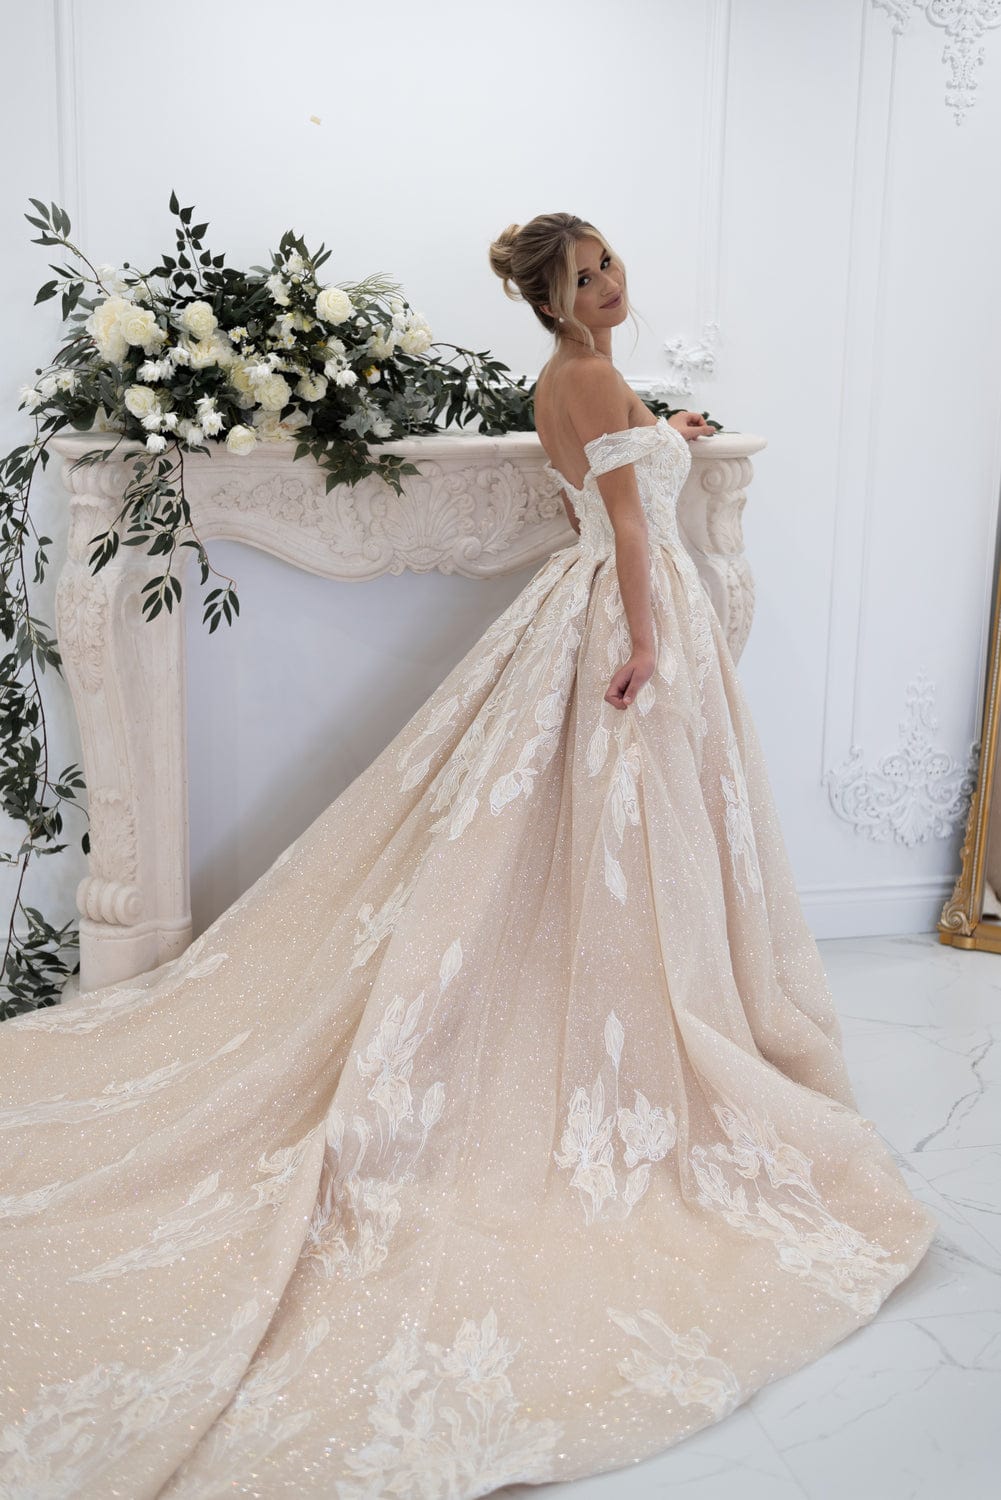 Chic Bridals Wedding Dresses Ivory/Champagne / Standard delivery 4-6 months +$0 Danika Wedding Gowns